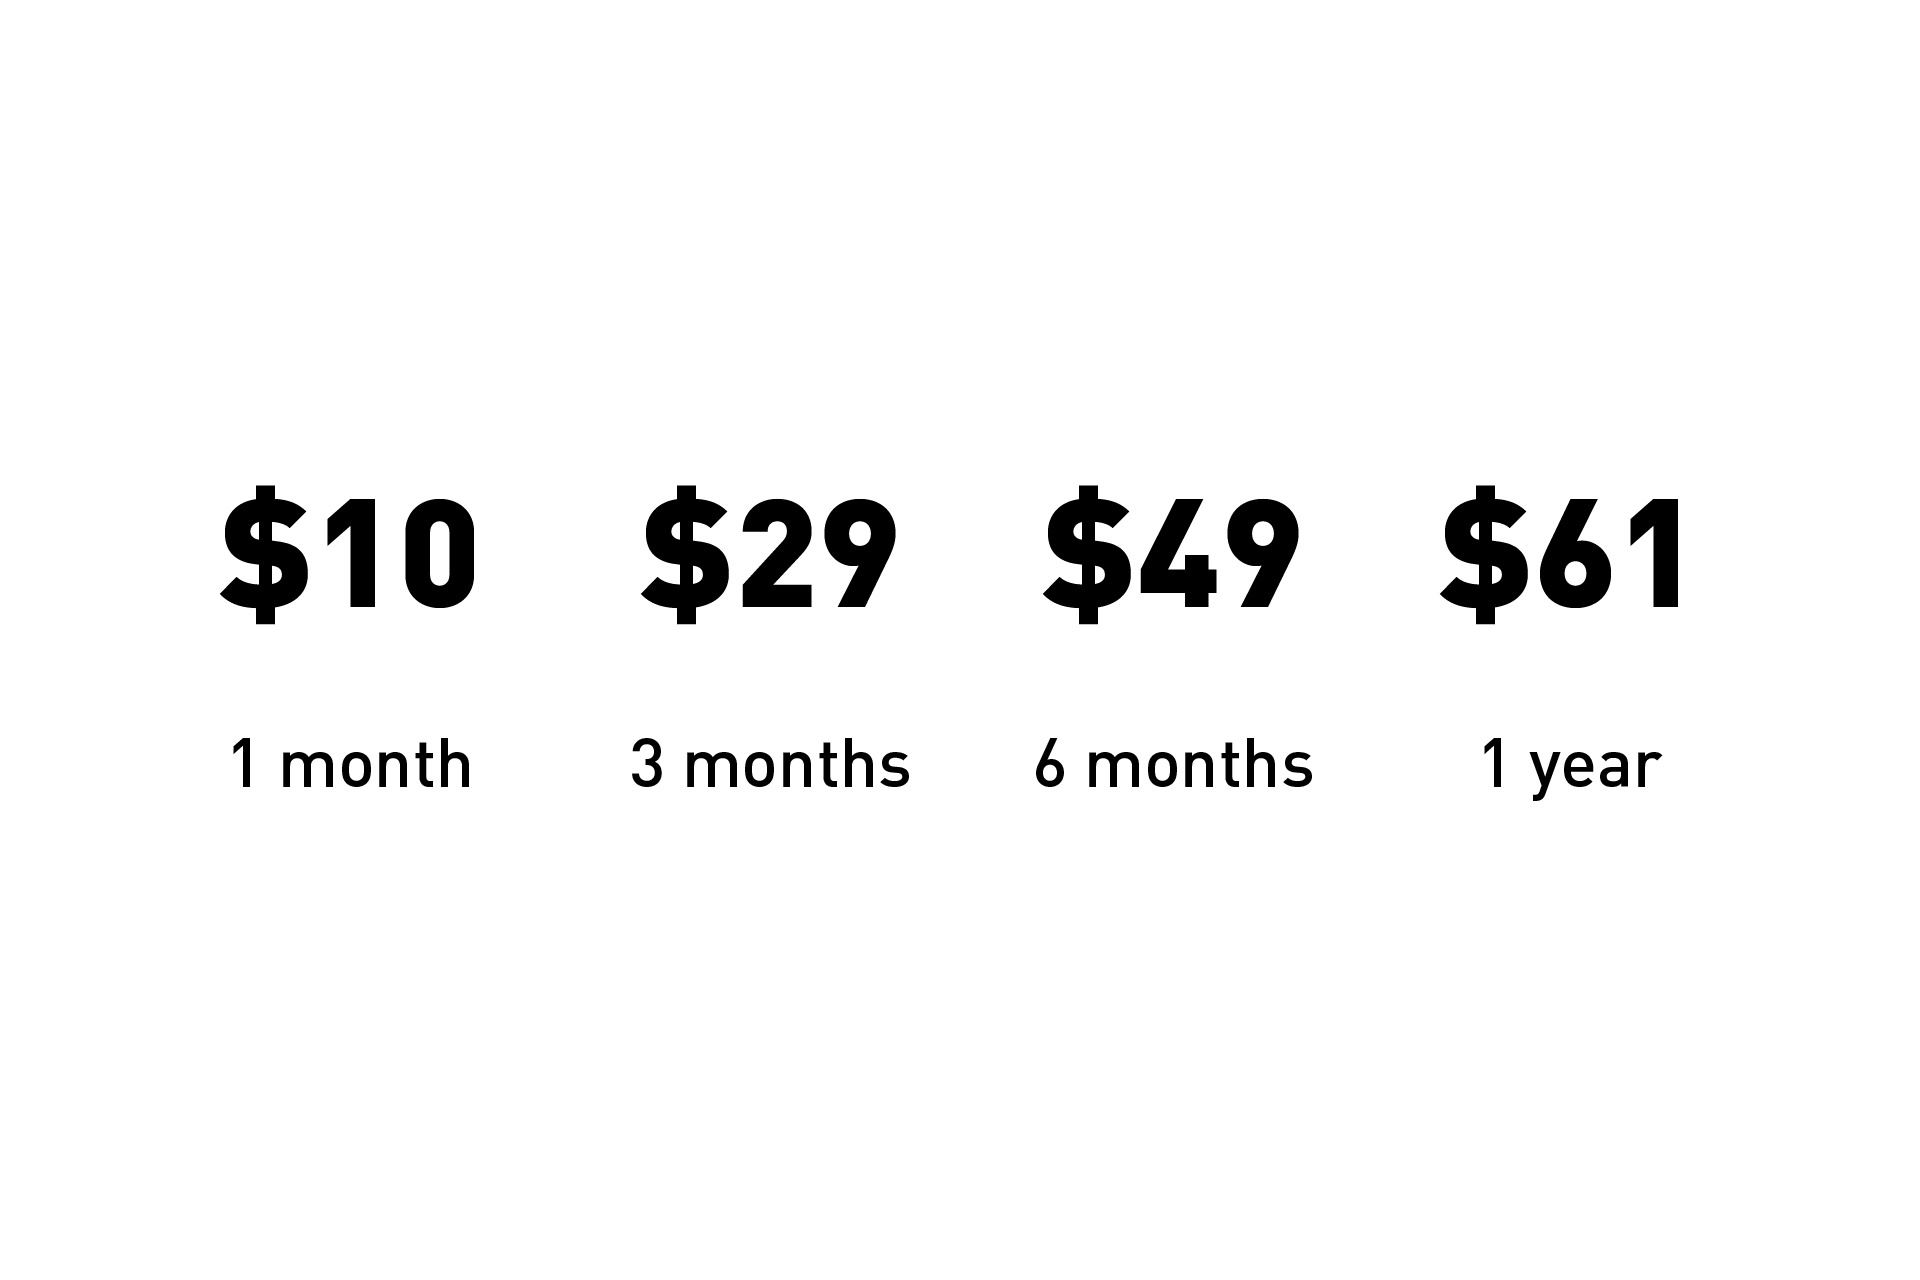 In terms of average subscription costs: $10 for 1 month, $29 for 3 months, $49 for 6 months and $61 per year.